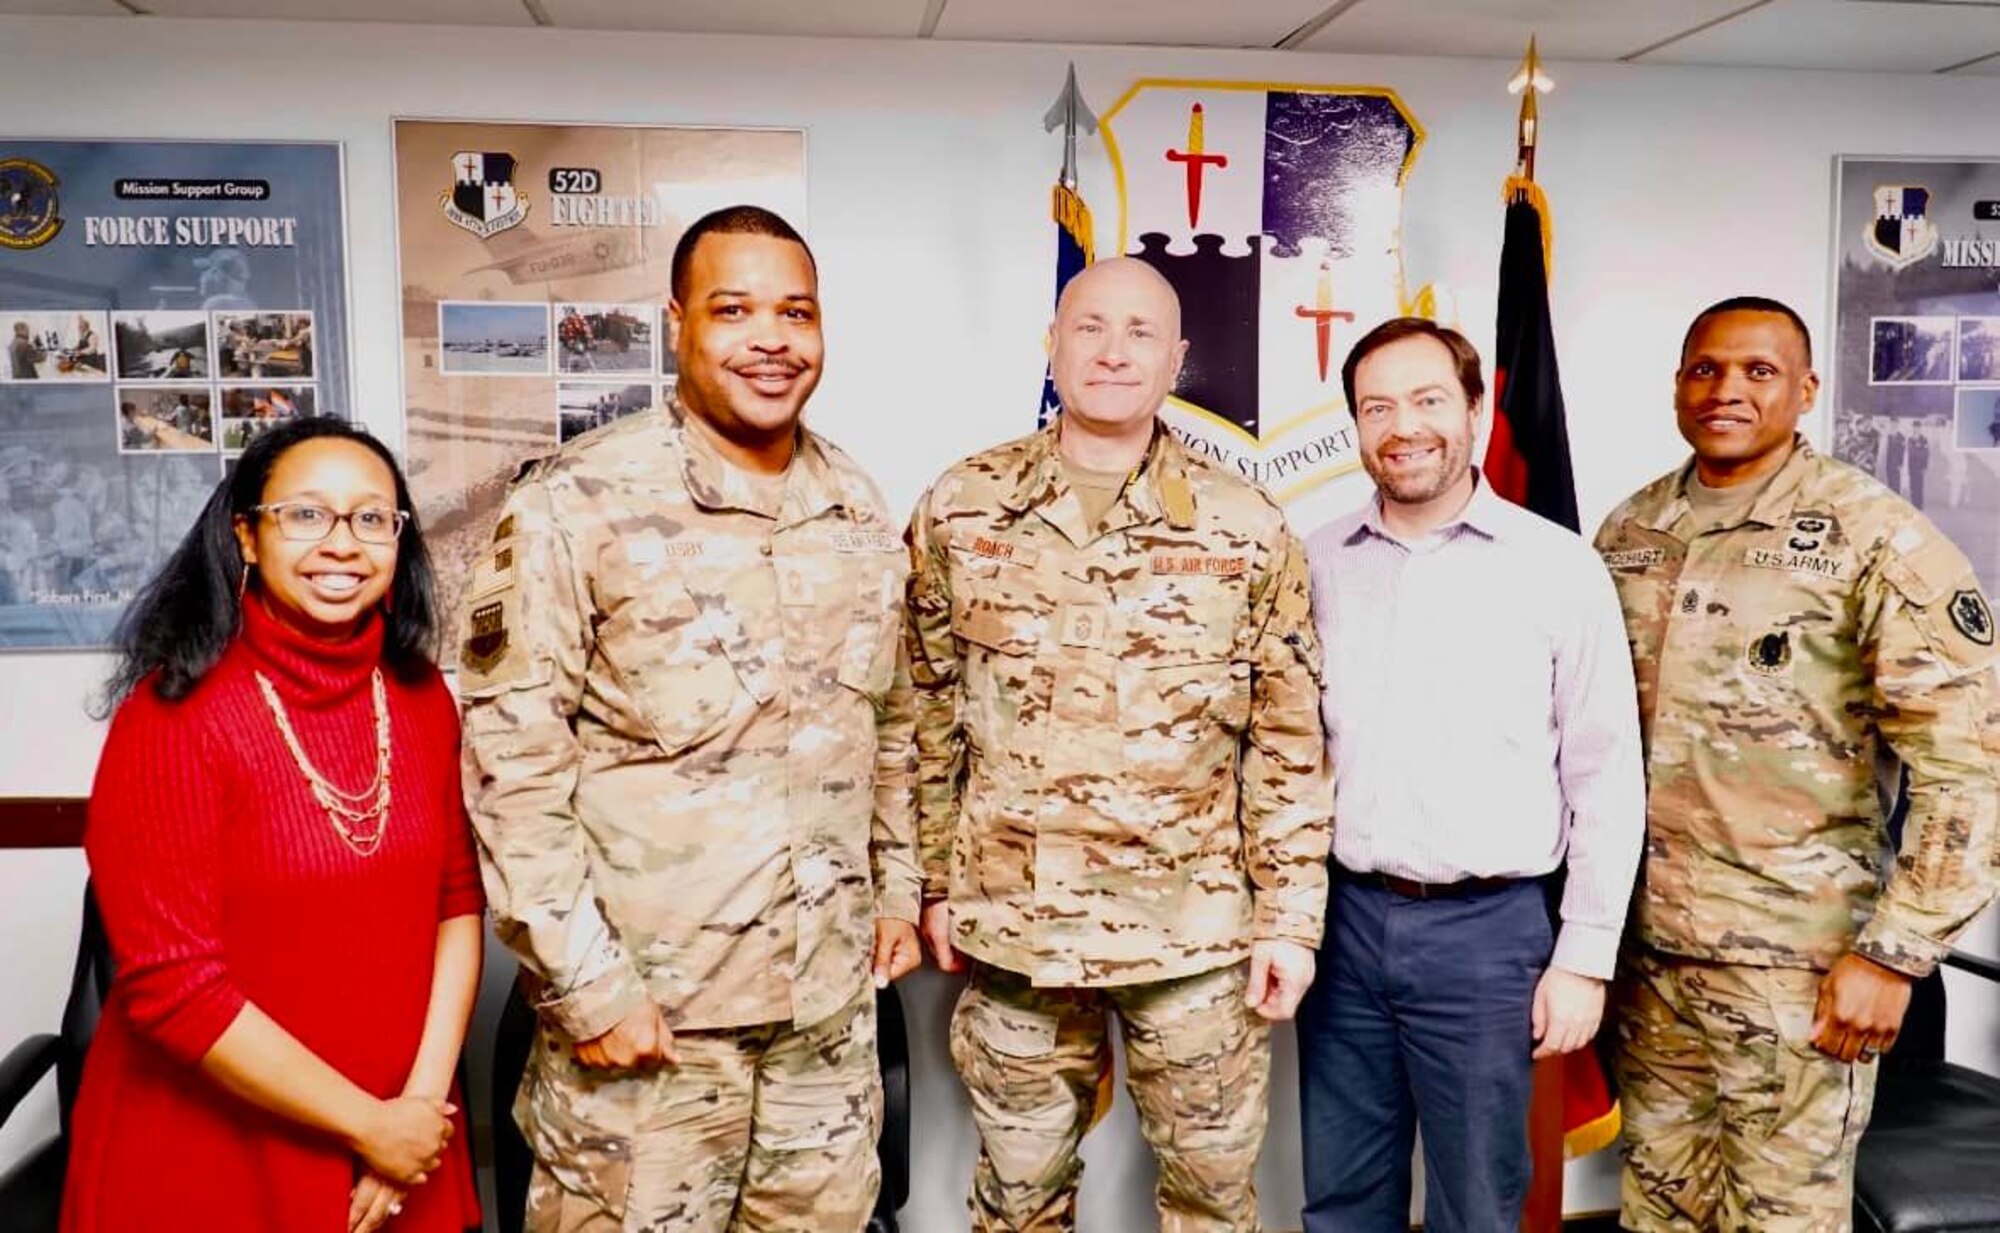 Pictured in photo left to right: Spangdahlem Exchange General Manager Jessica Dean, Exchange Senior Enlisted Advisor Chief Master Sgt. Kevin Osby, 52 FW Command Chief Master Sgt. Toby Roach, 52 MSG Deputy Director Russell Oster, and Exchange Europe/Africa/Southwest Asia Region Senior Enlisted Advisor Sgt. Maj. Jason Urquhart. (Courtesy photo of Marisa Connor)